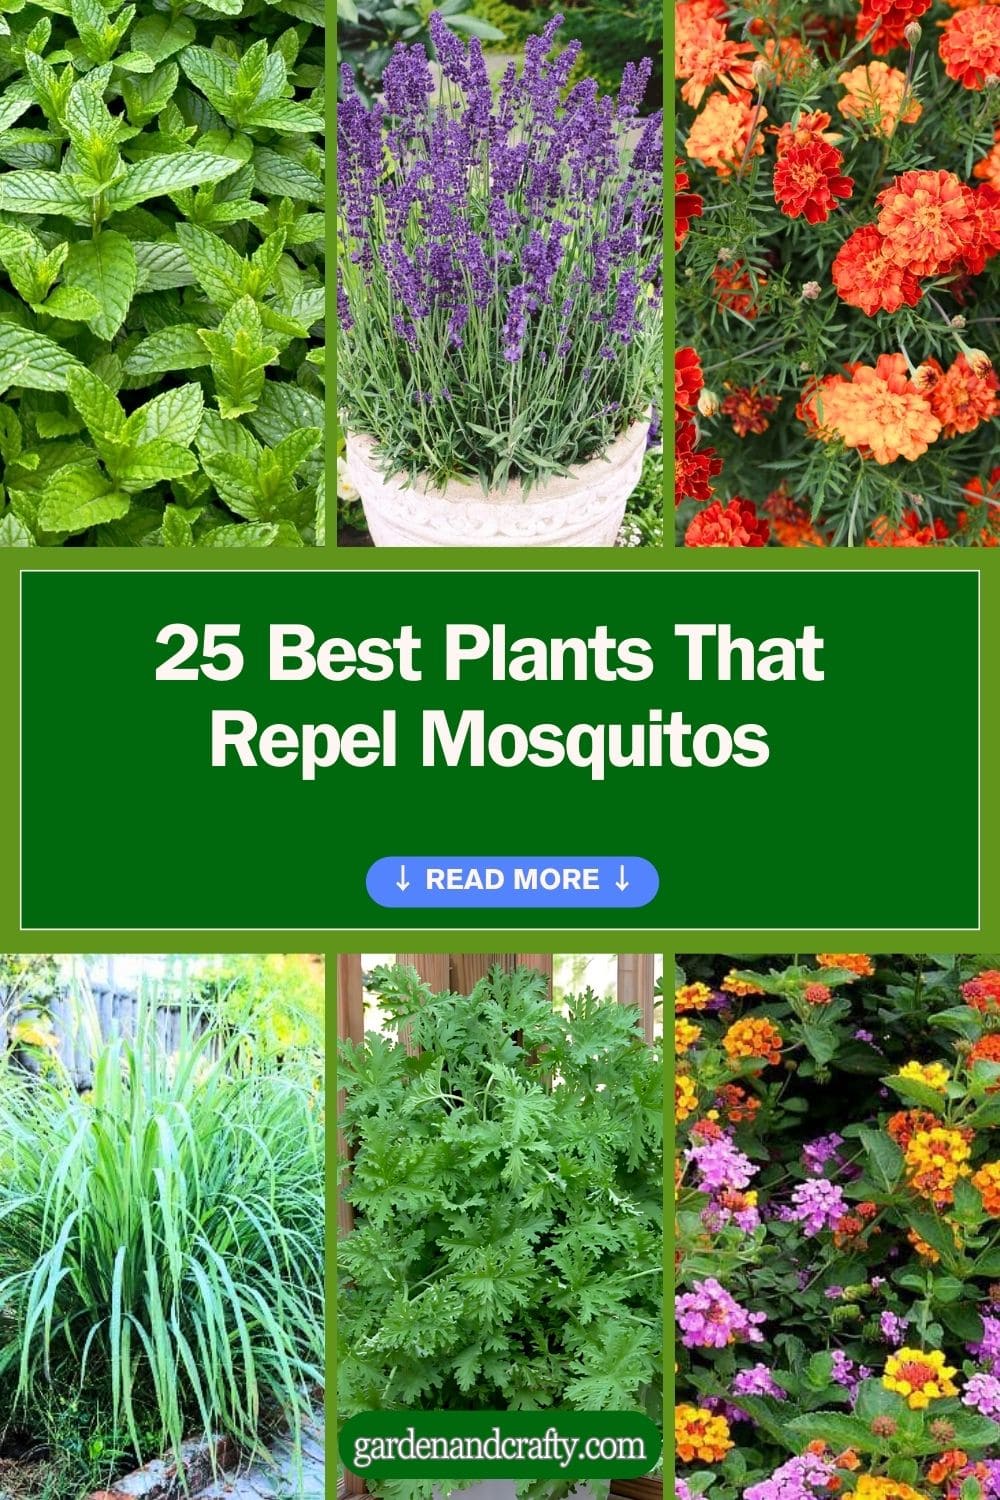 25 Best Plants That Repel Mosquitos